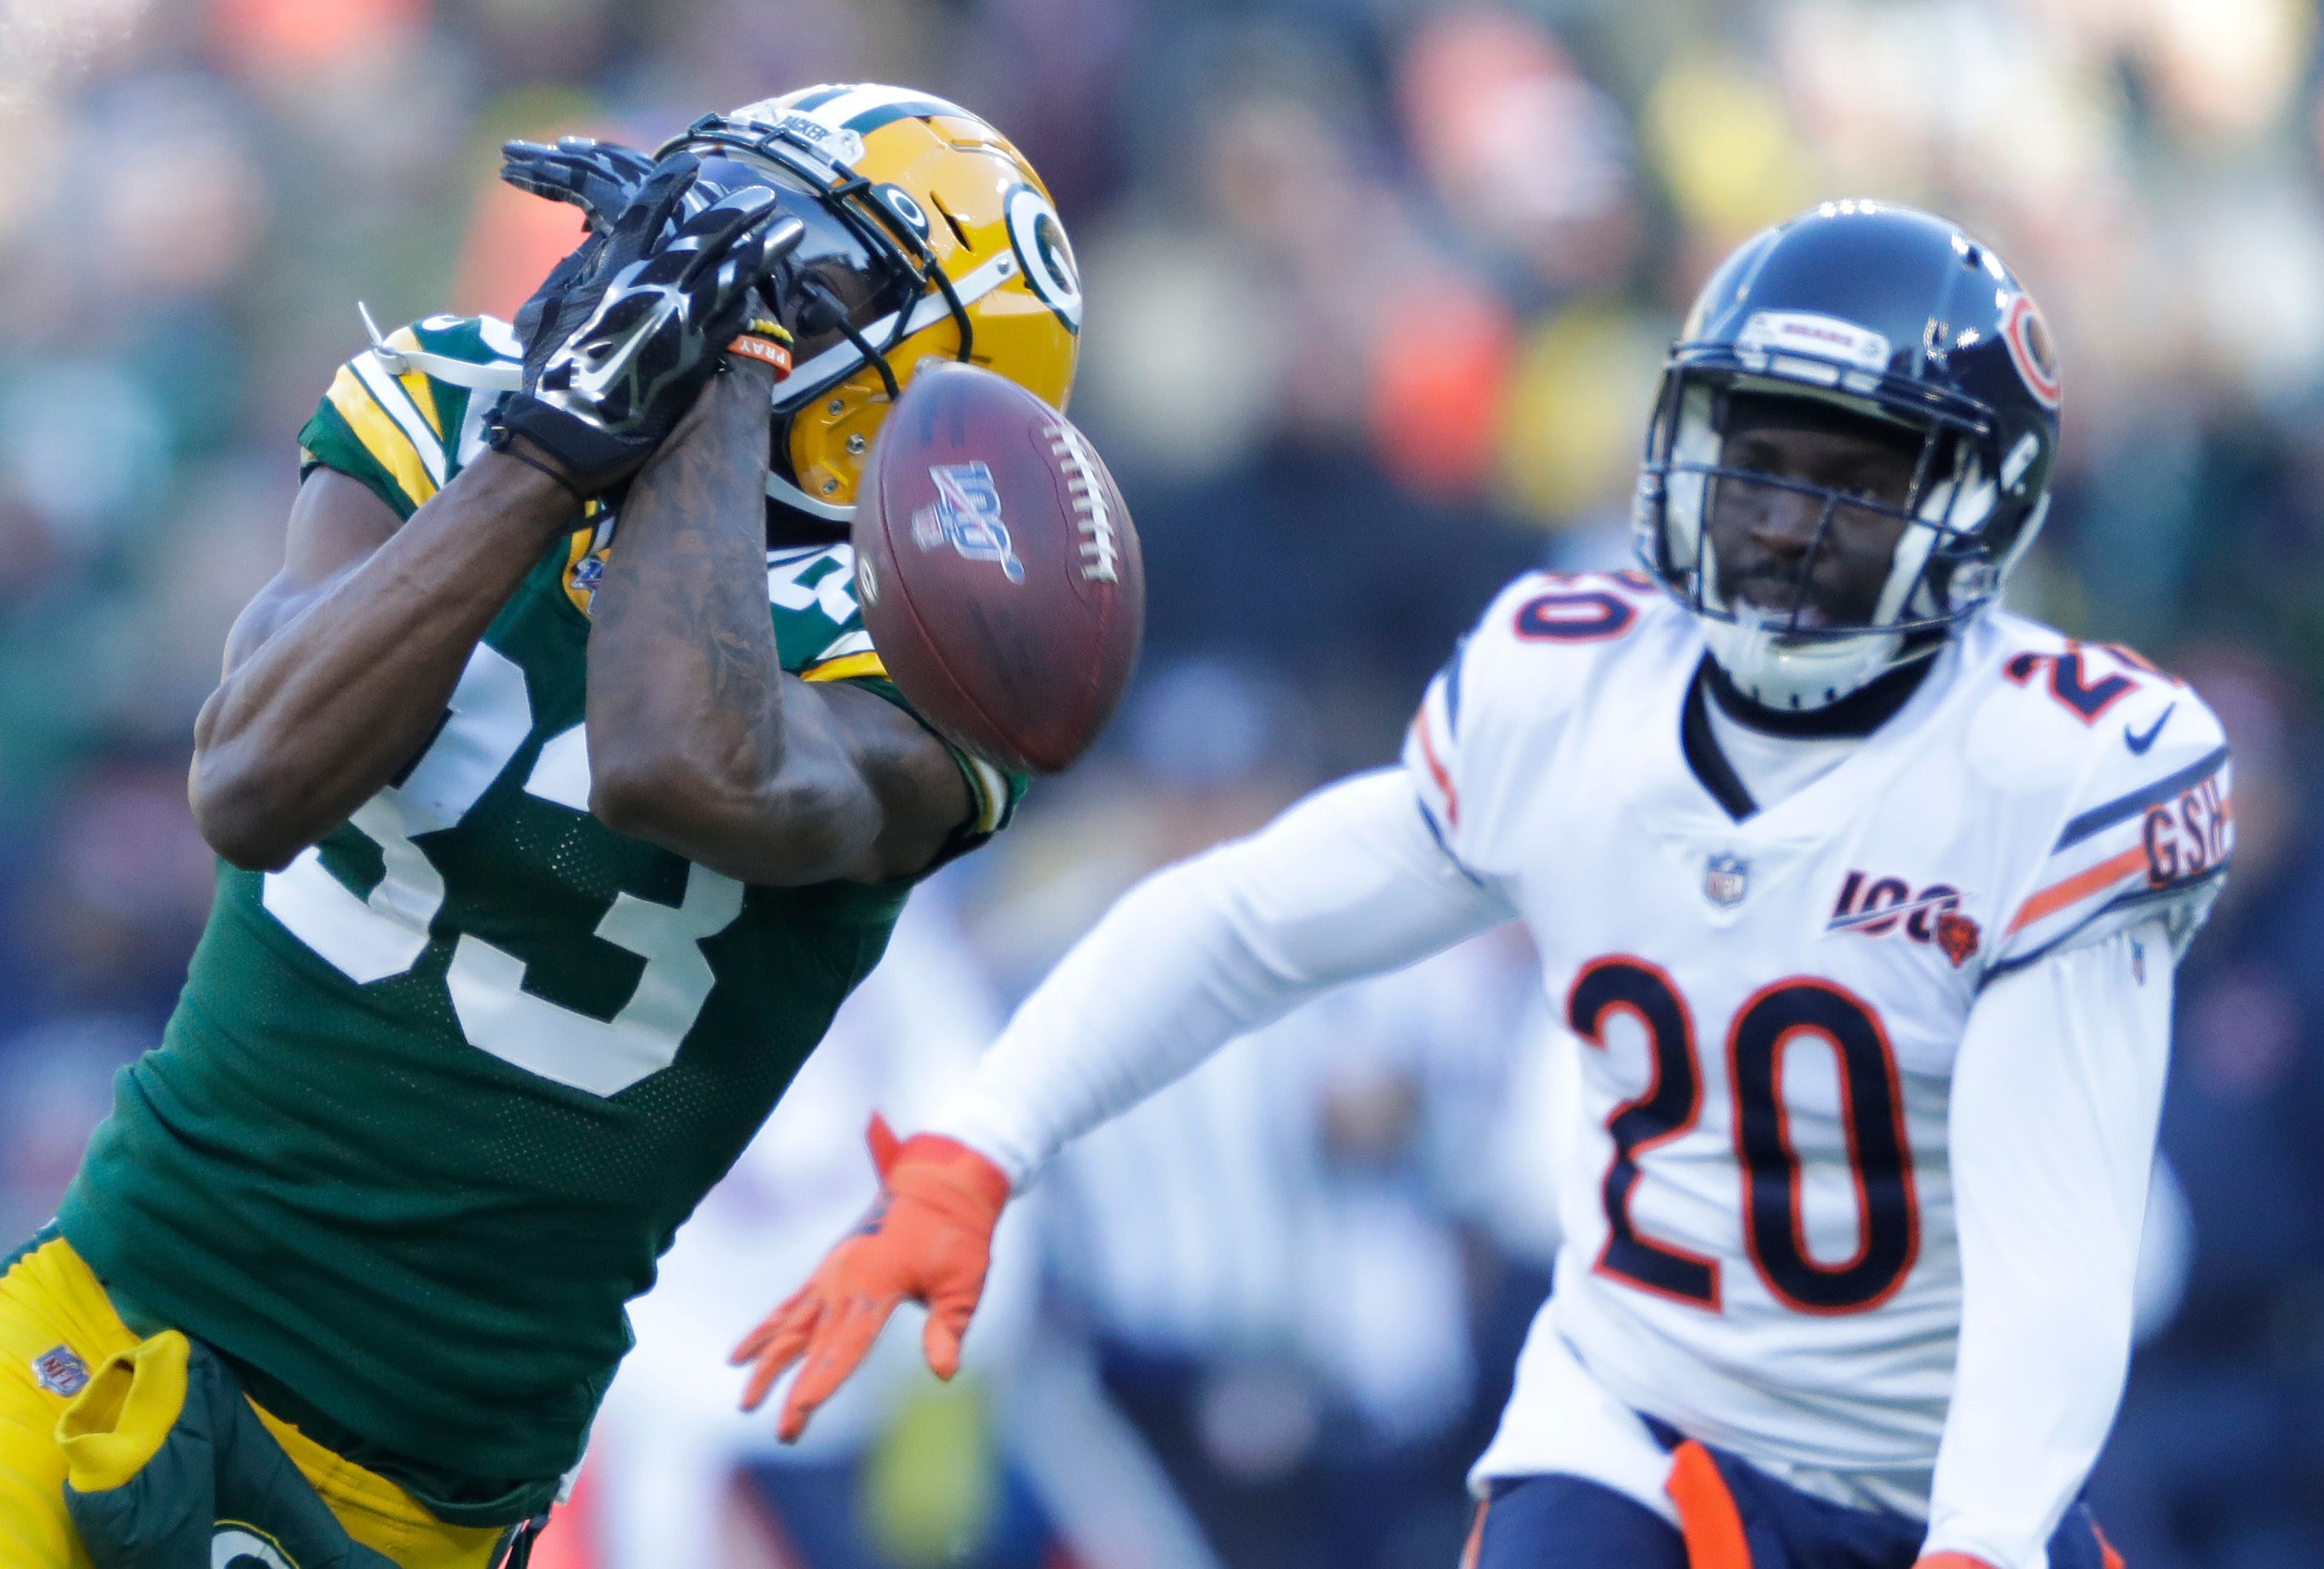 Green Bay Packers wide receiver Marquez Valdes-Scantling (83) drops a pass in the first quarter as he is covered by Chicago Bears cornerback Prince Amukamara (20) Sunday, December 15, 2019, at Lambeau Field in Green Bay, Wis.